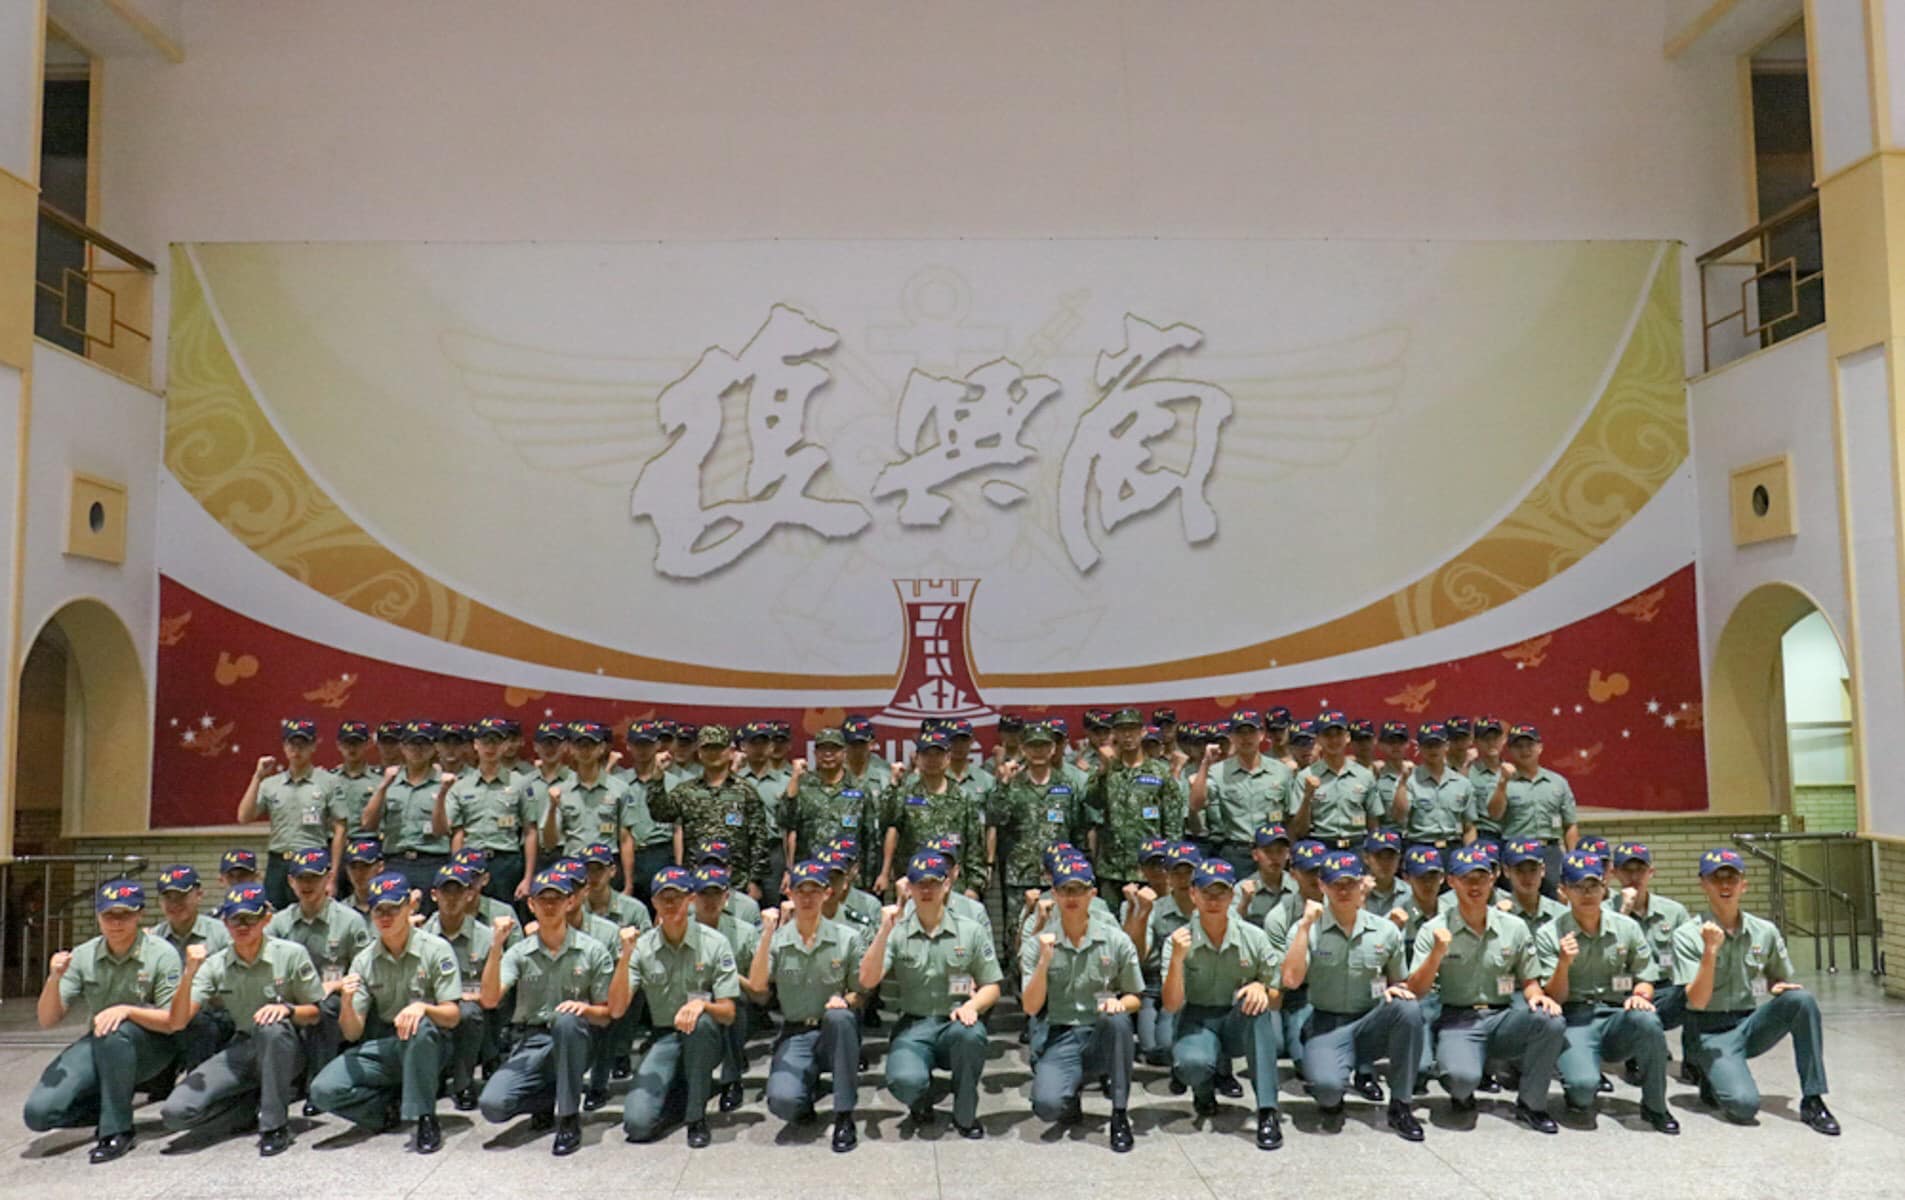 All the commanders and cadets made a gesture of “strong power.”